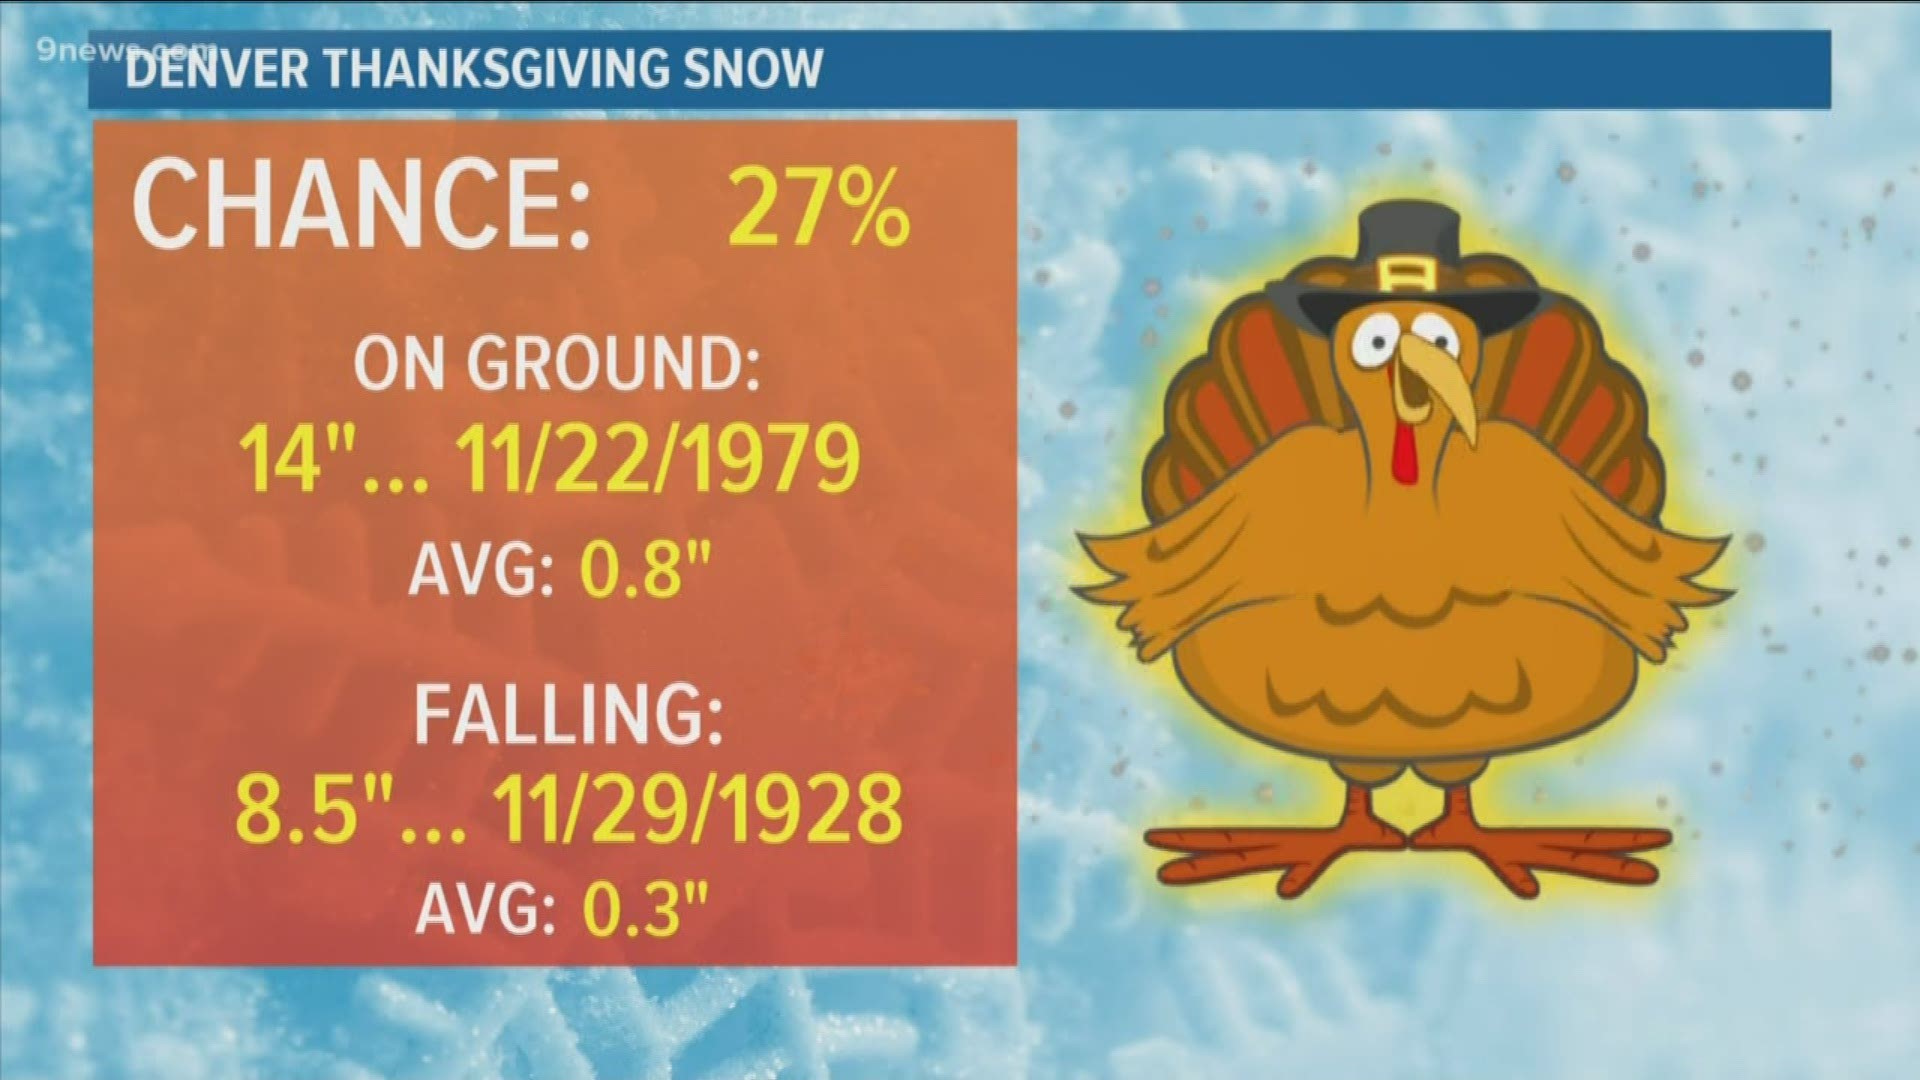 Last weekend it was almost 80 degrees! So, what about Thanksgiving? Will it be warm, or white?